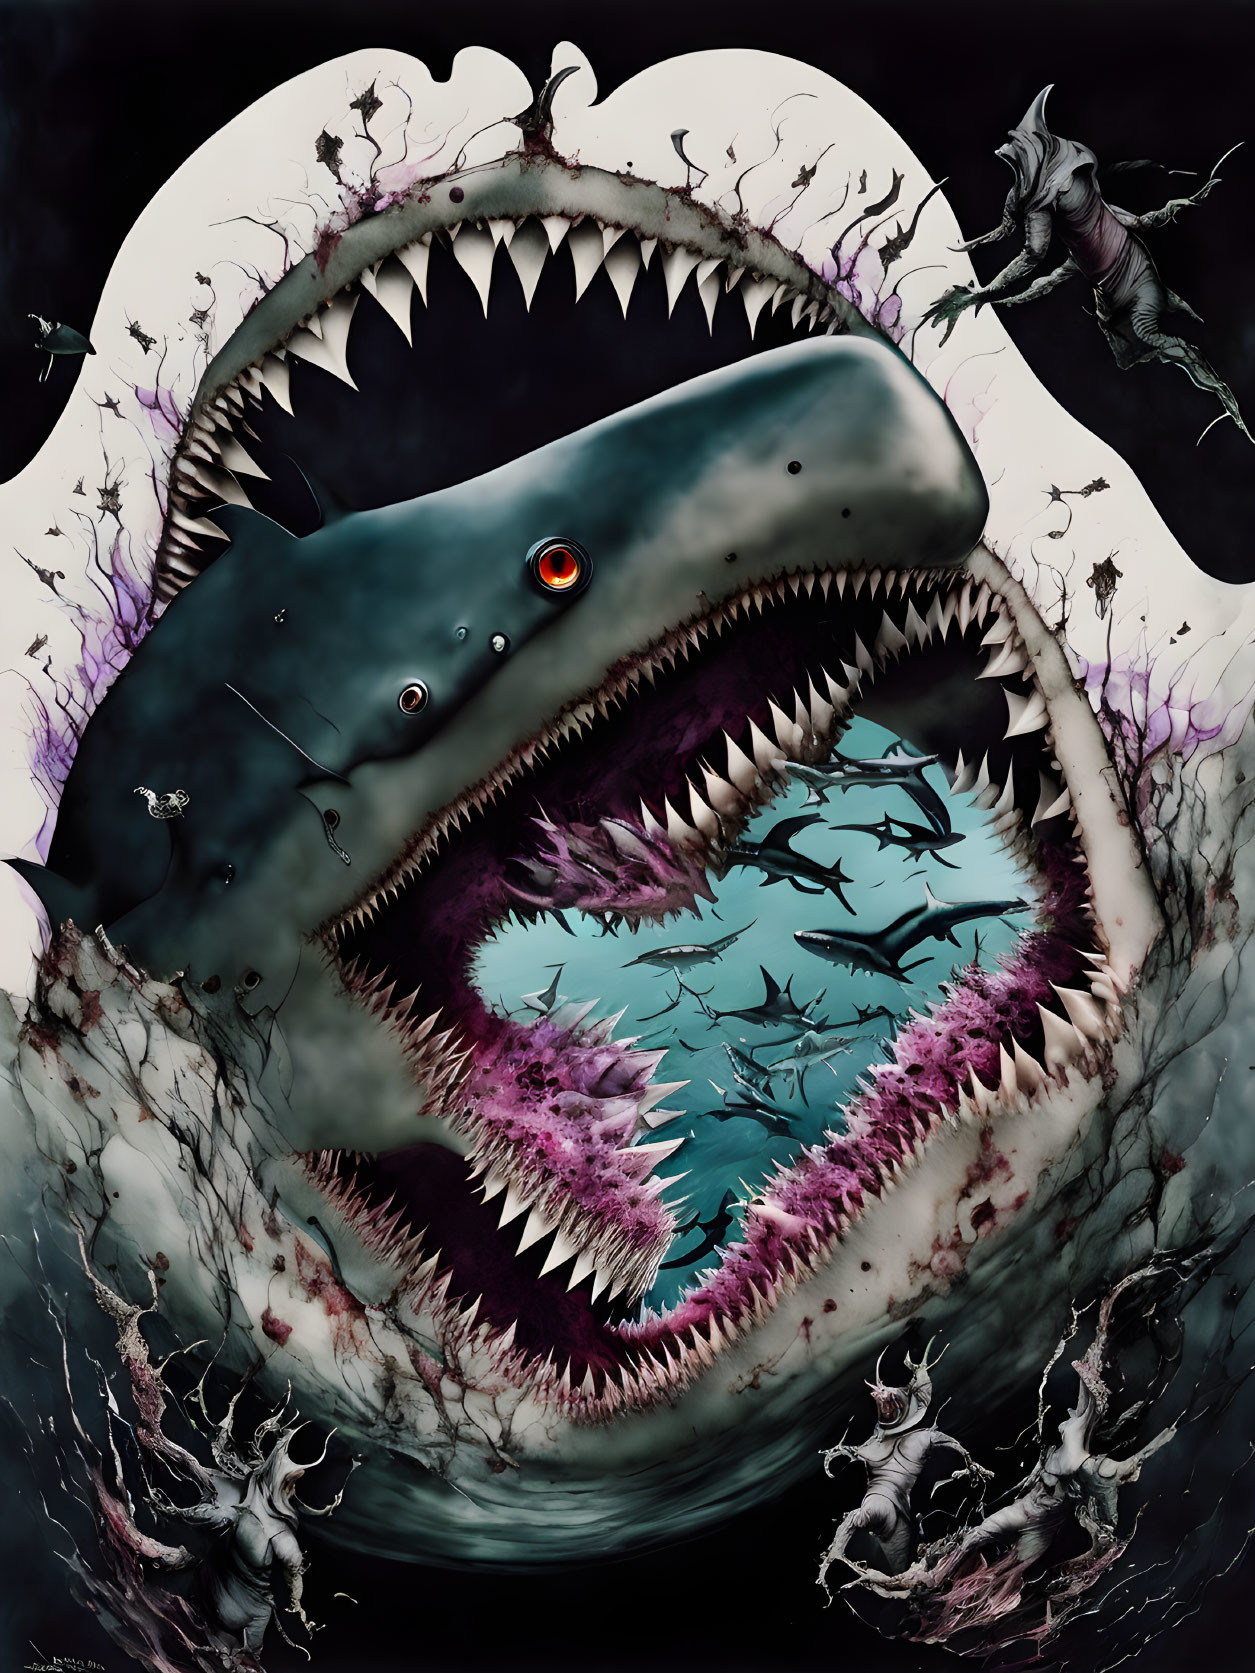 The Sharks Mouth